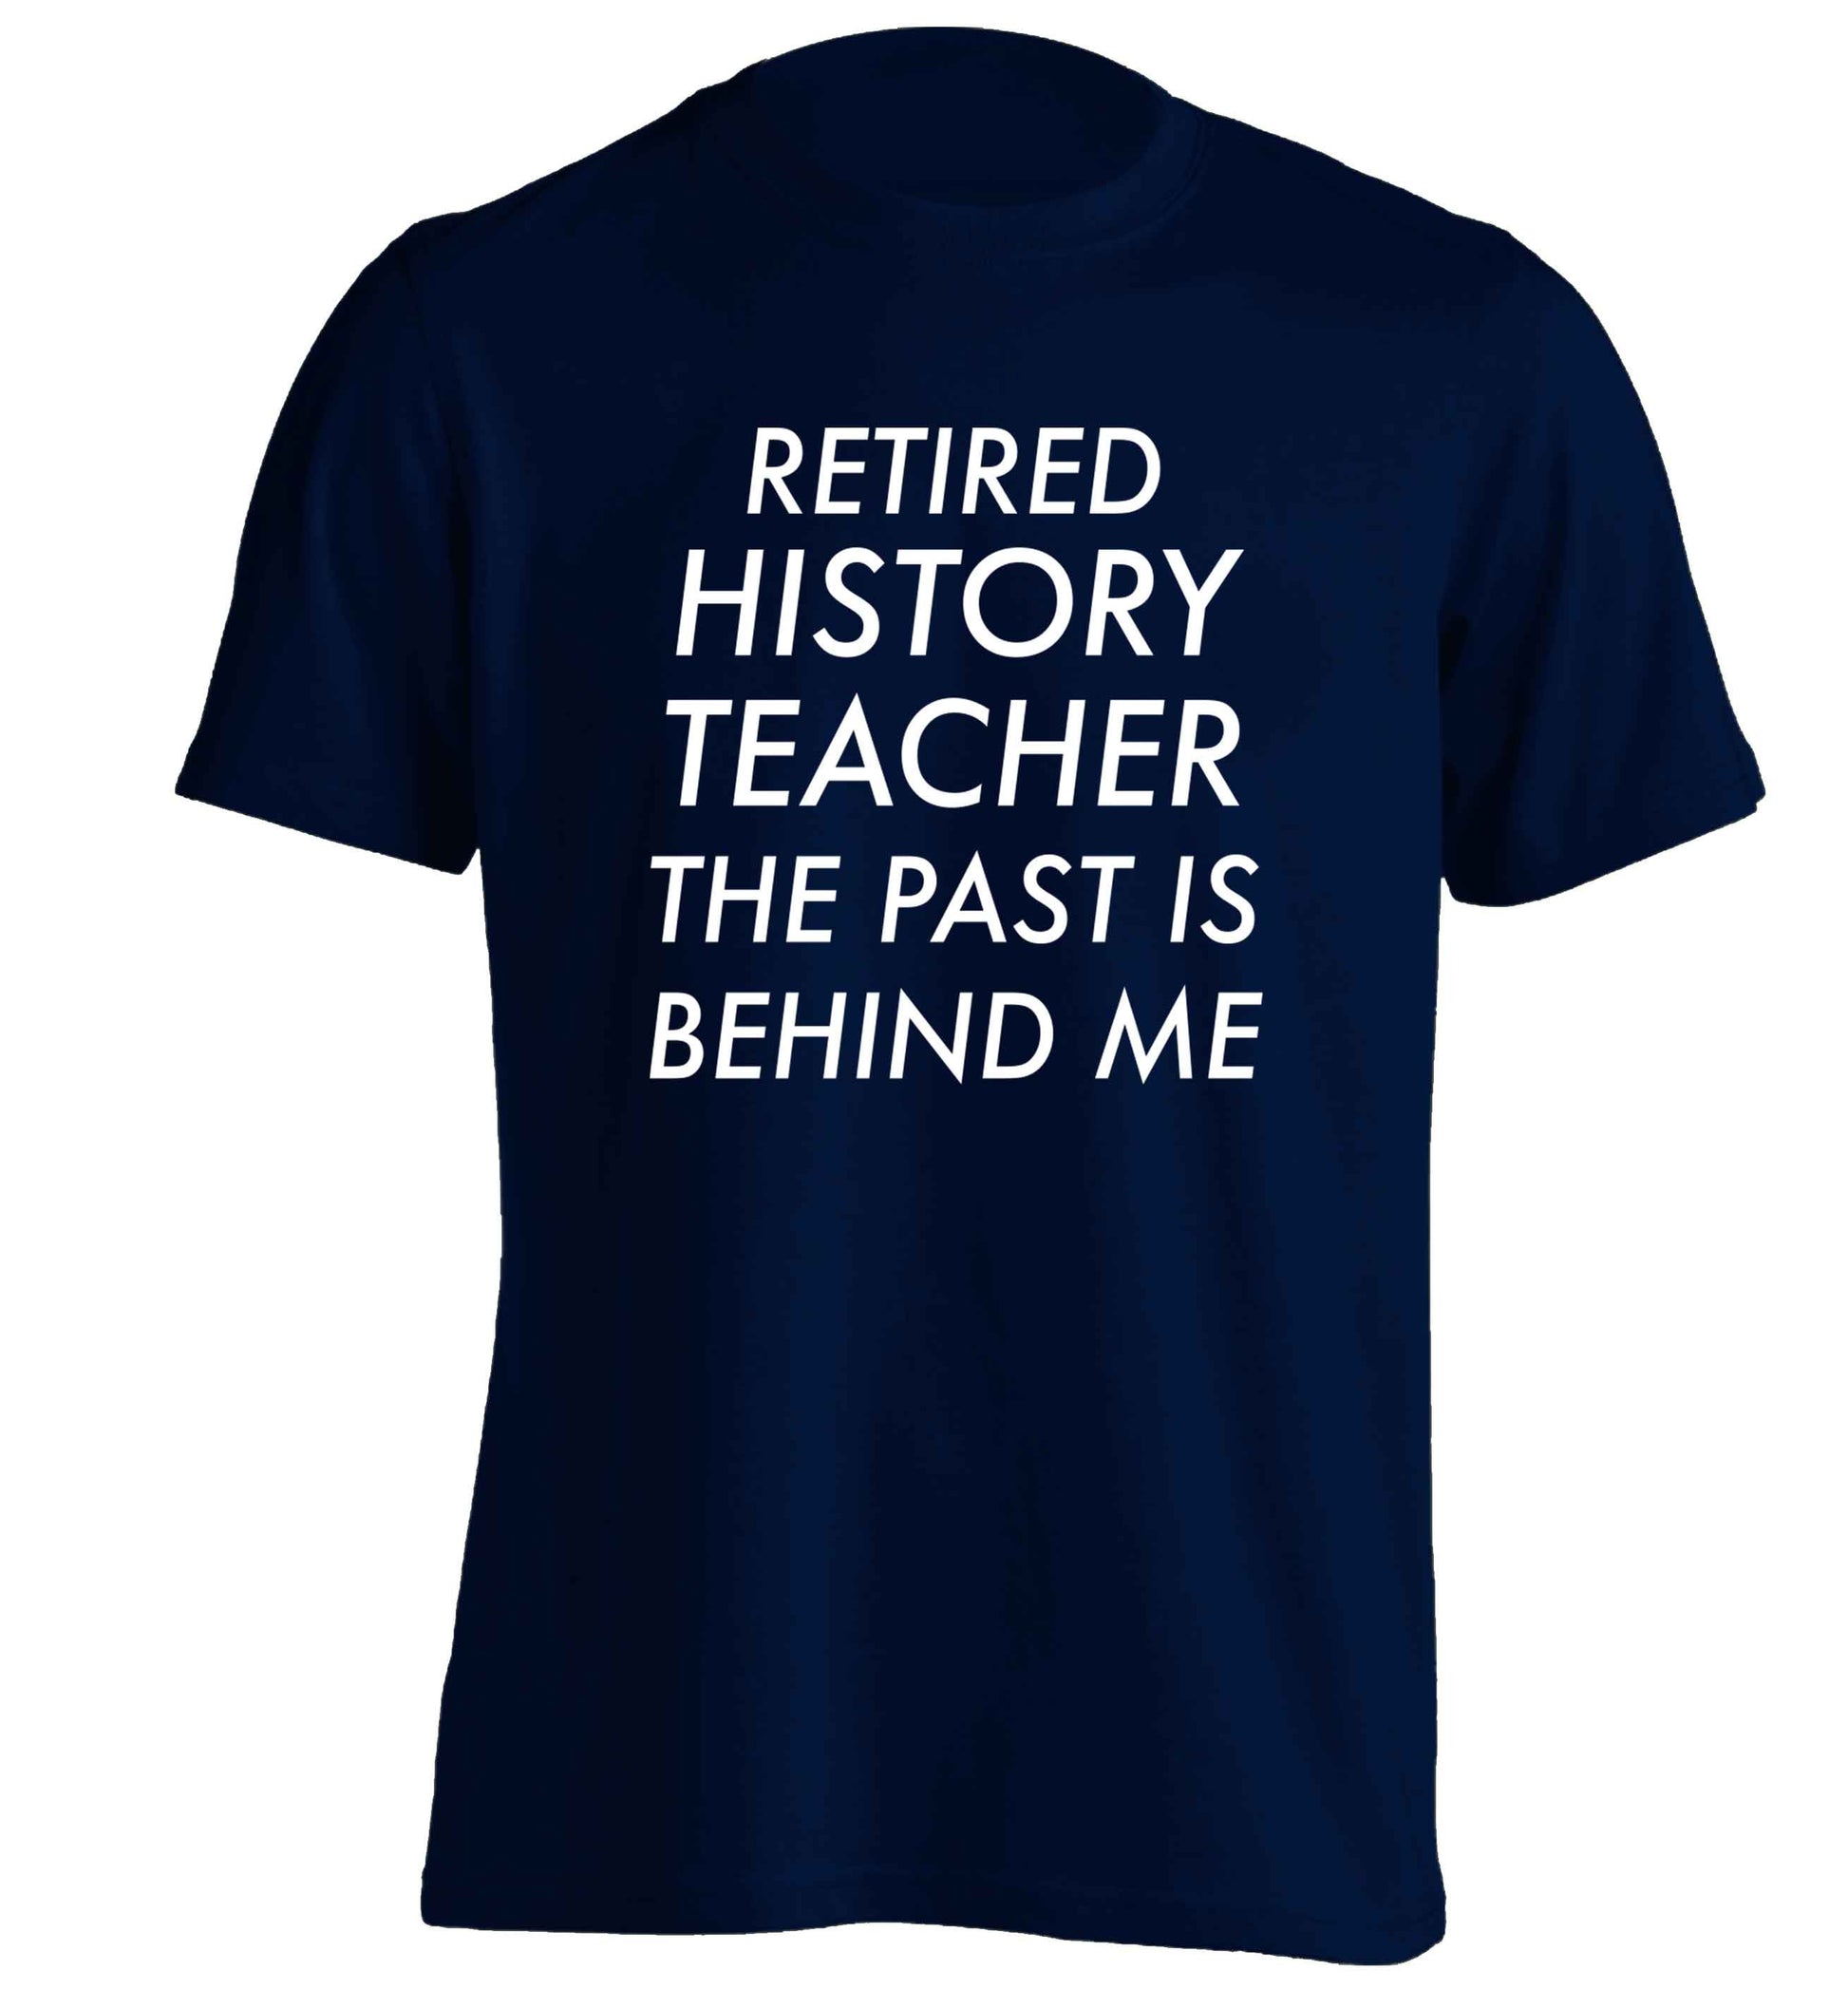 Retired history teacher the past is behind me adults unisex navy Tshirt 2XL